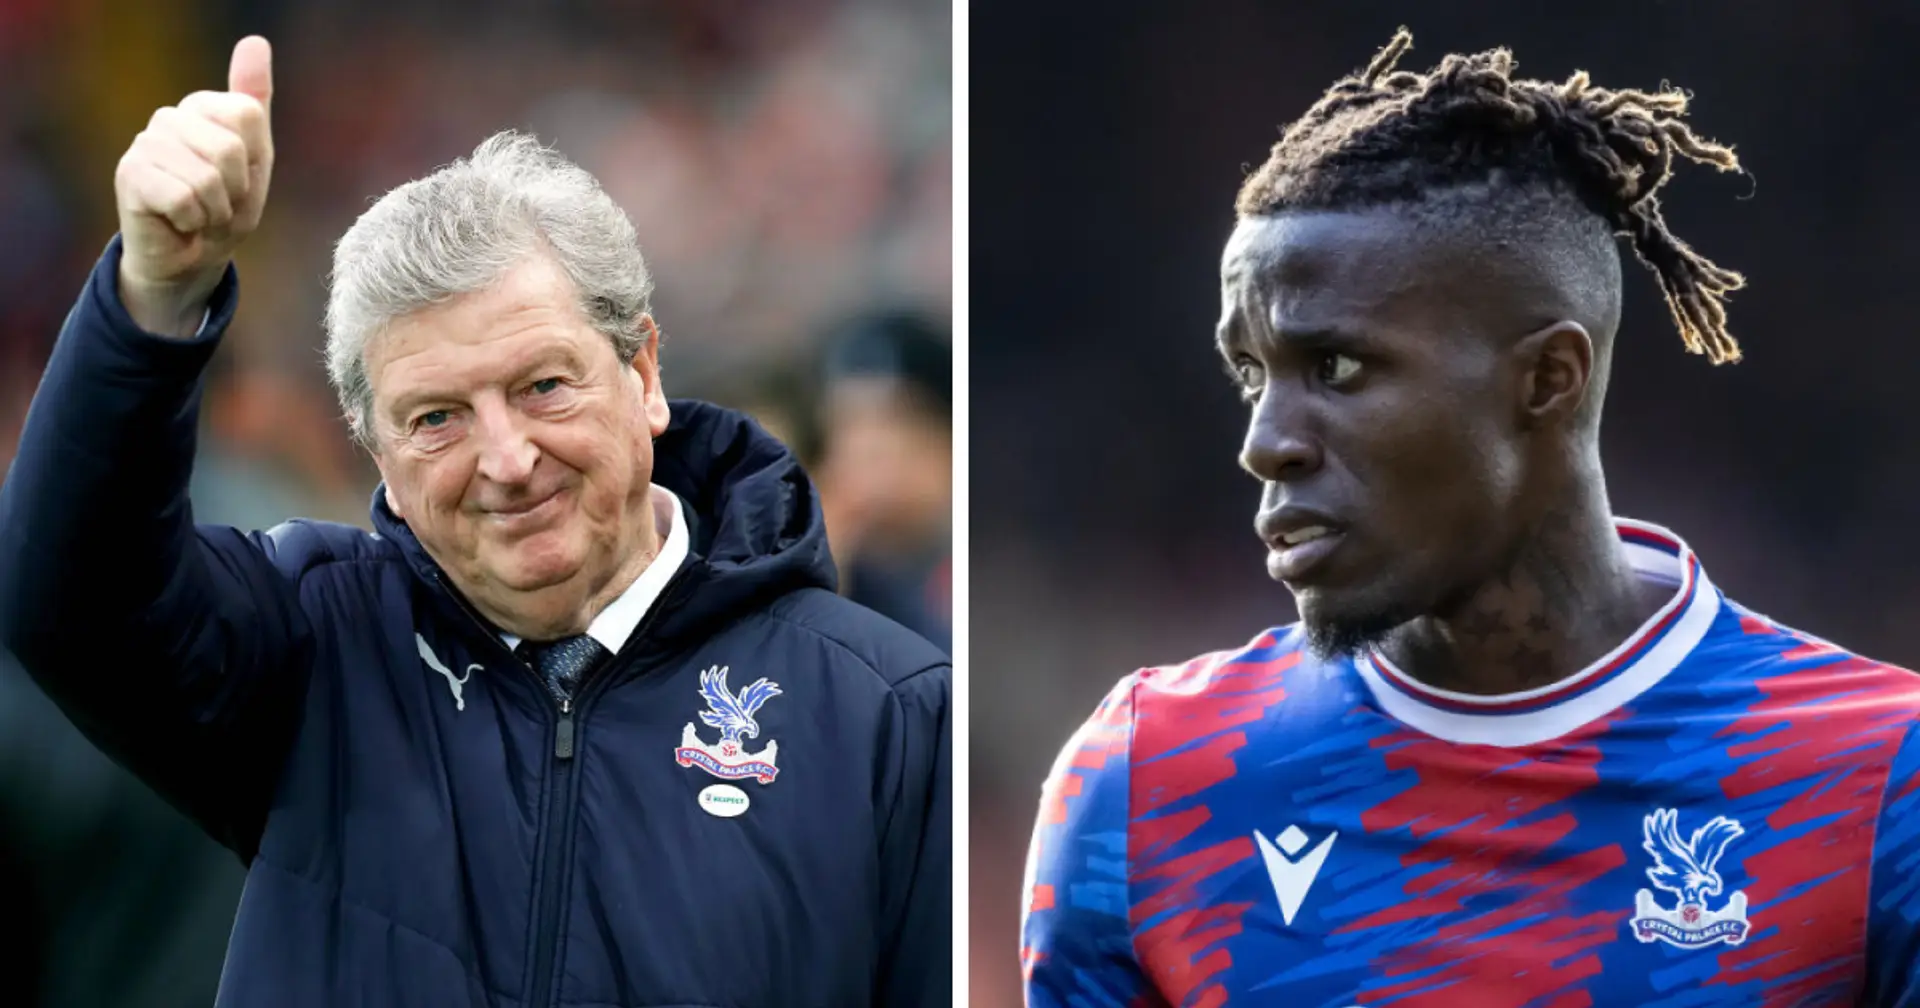 Crystal Palace pursued a major star as replacement for Wilfried Zaha